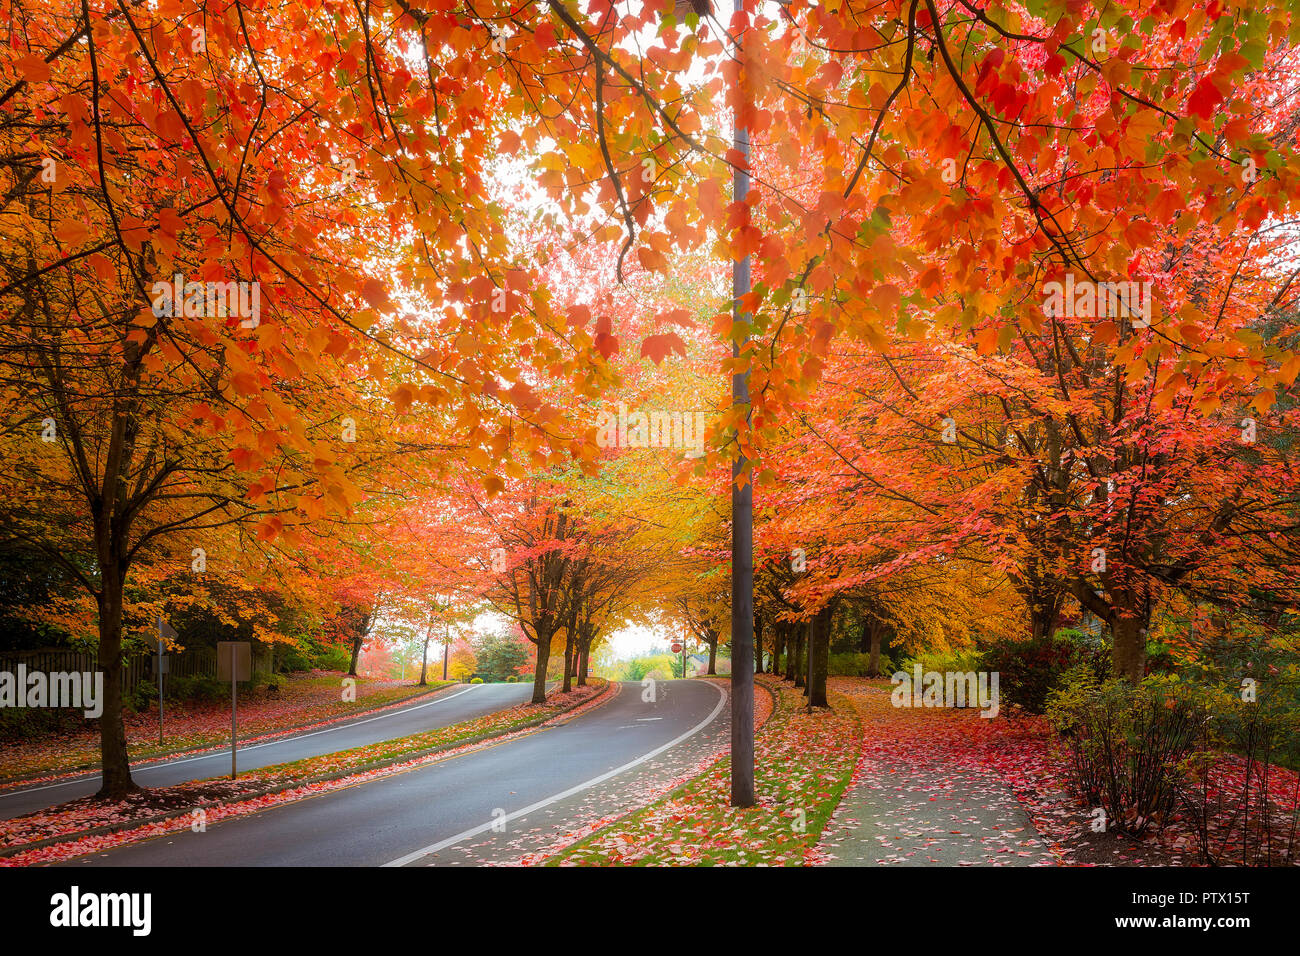 Maple trees canopy lined curvy winding street with fall foliage during autumn season in Oregon Stock Photo